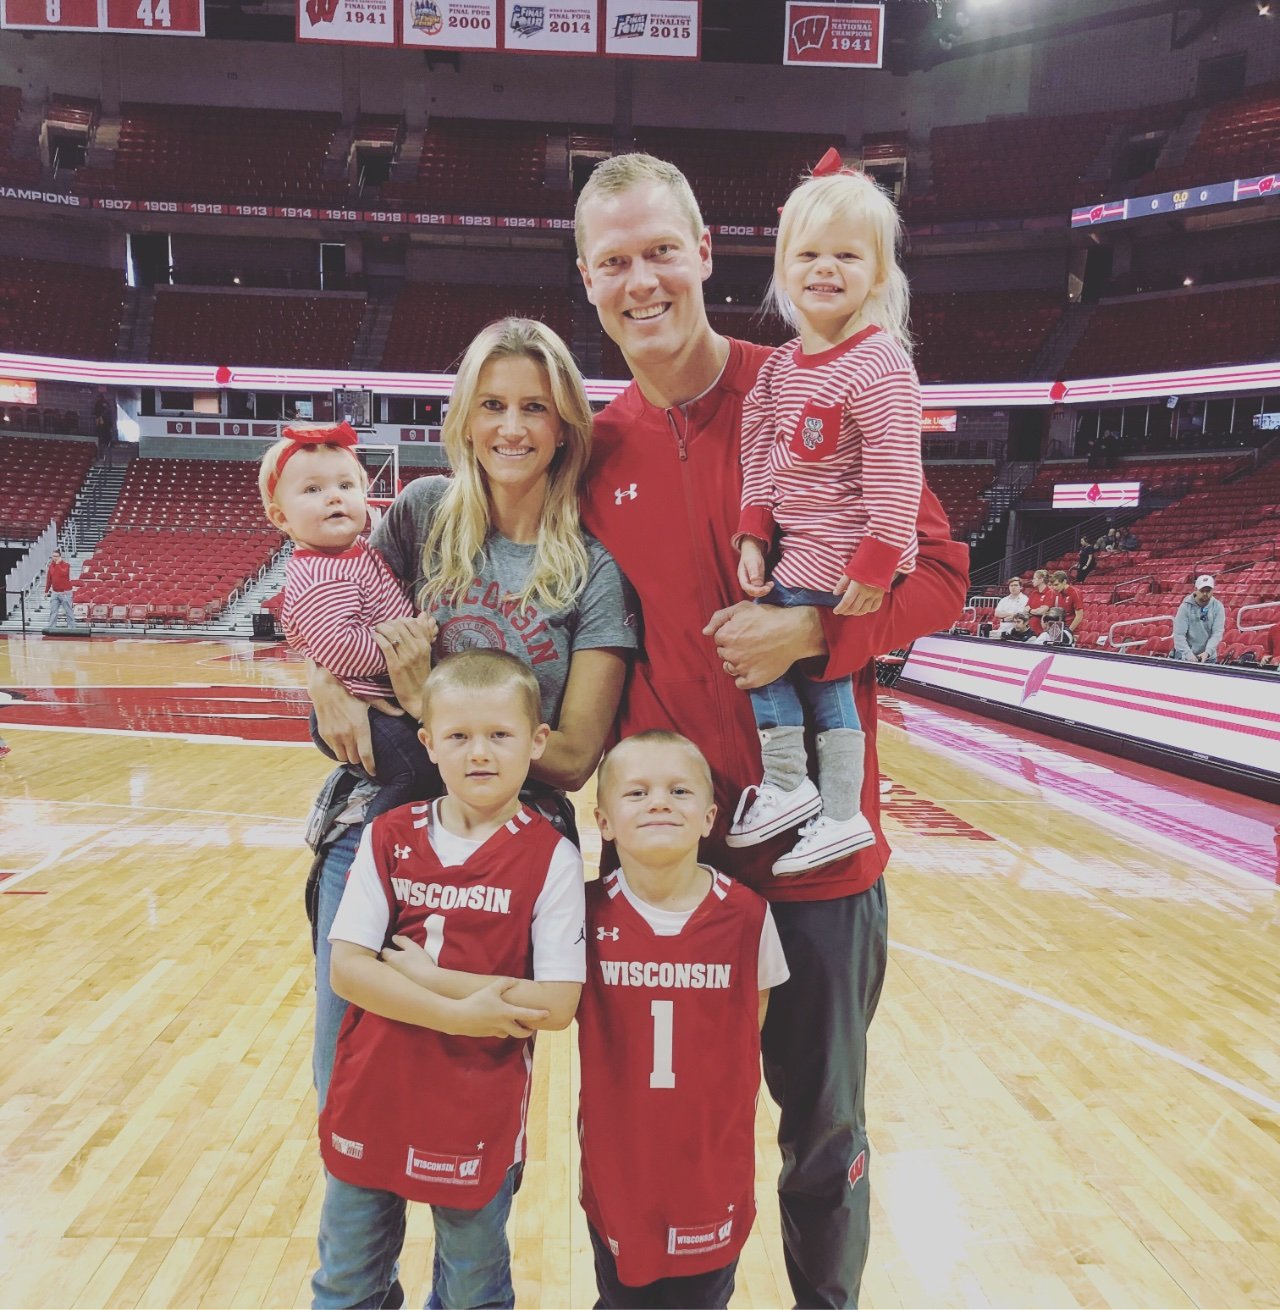 Husband, Father & Assistant men's basketball coach at the University of Wisconsin